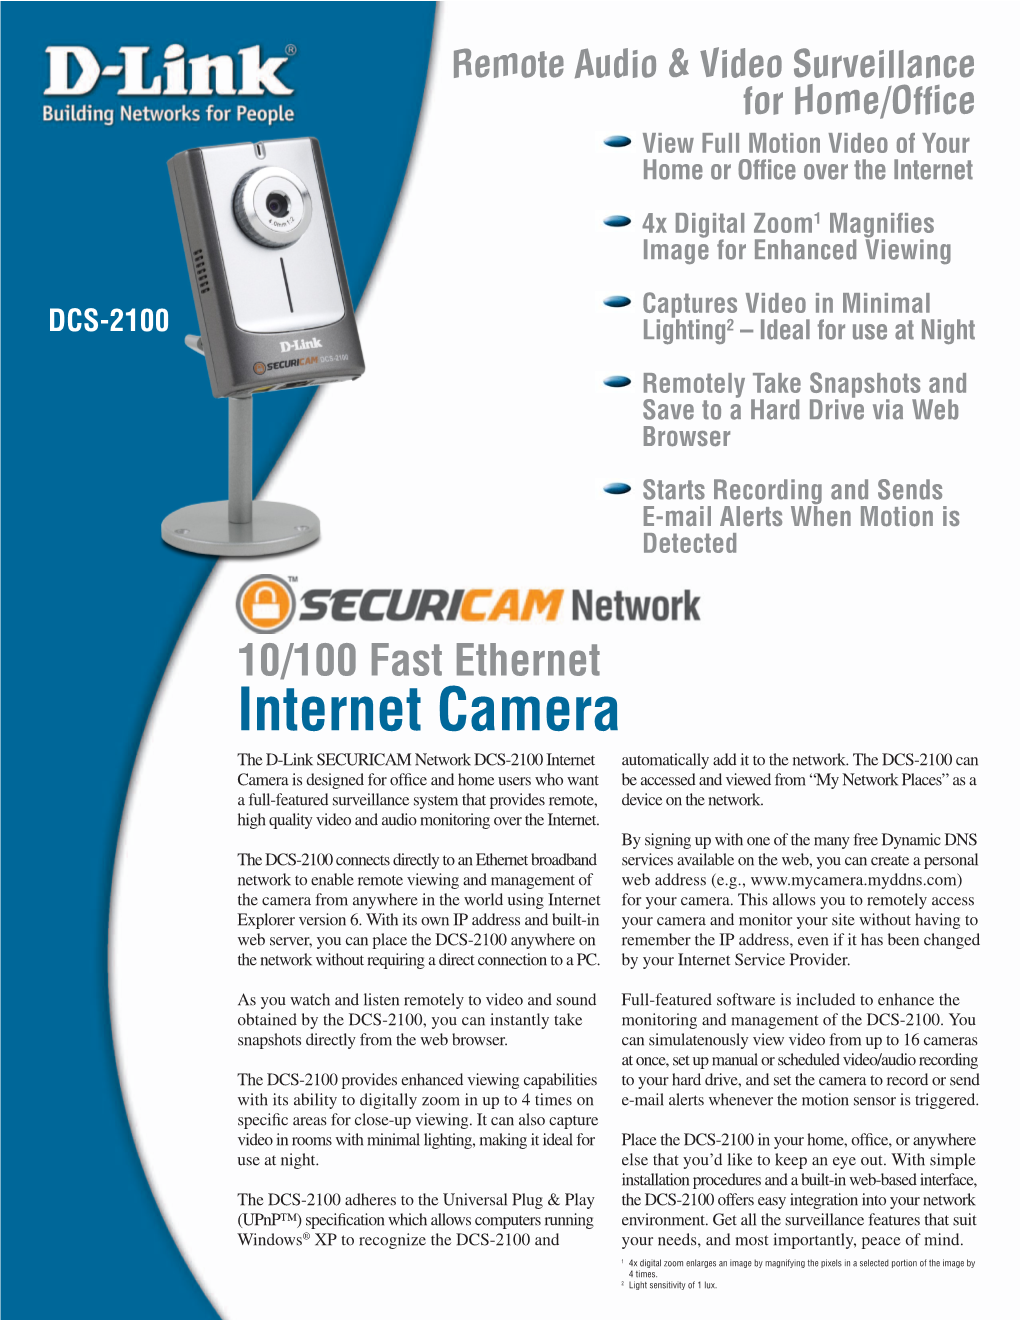 Internet Camera the D-Link SECURICAM Network DCS-2100 Internet Automatically Add It to the Network